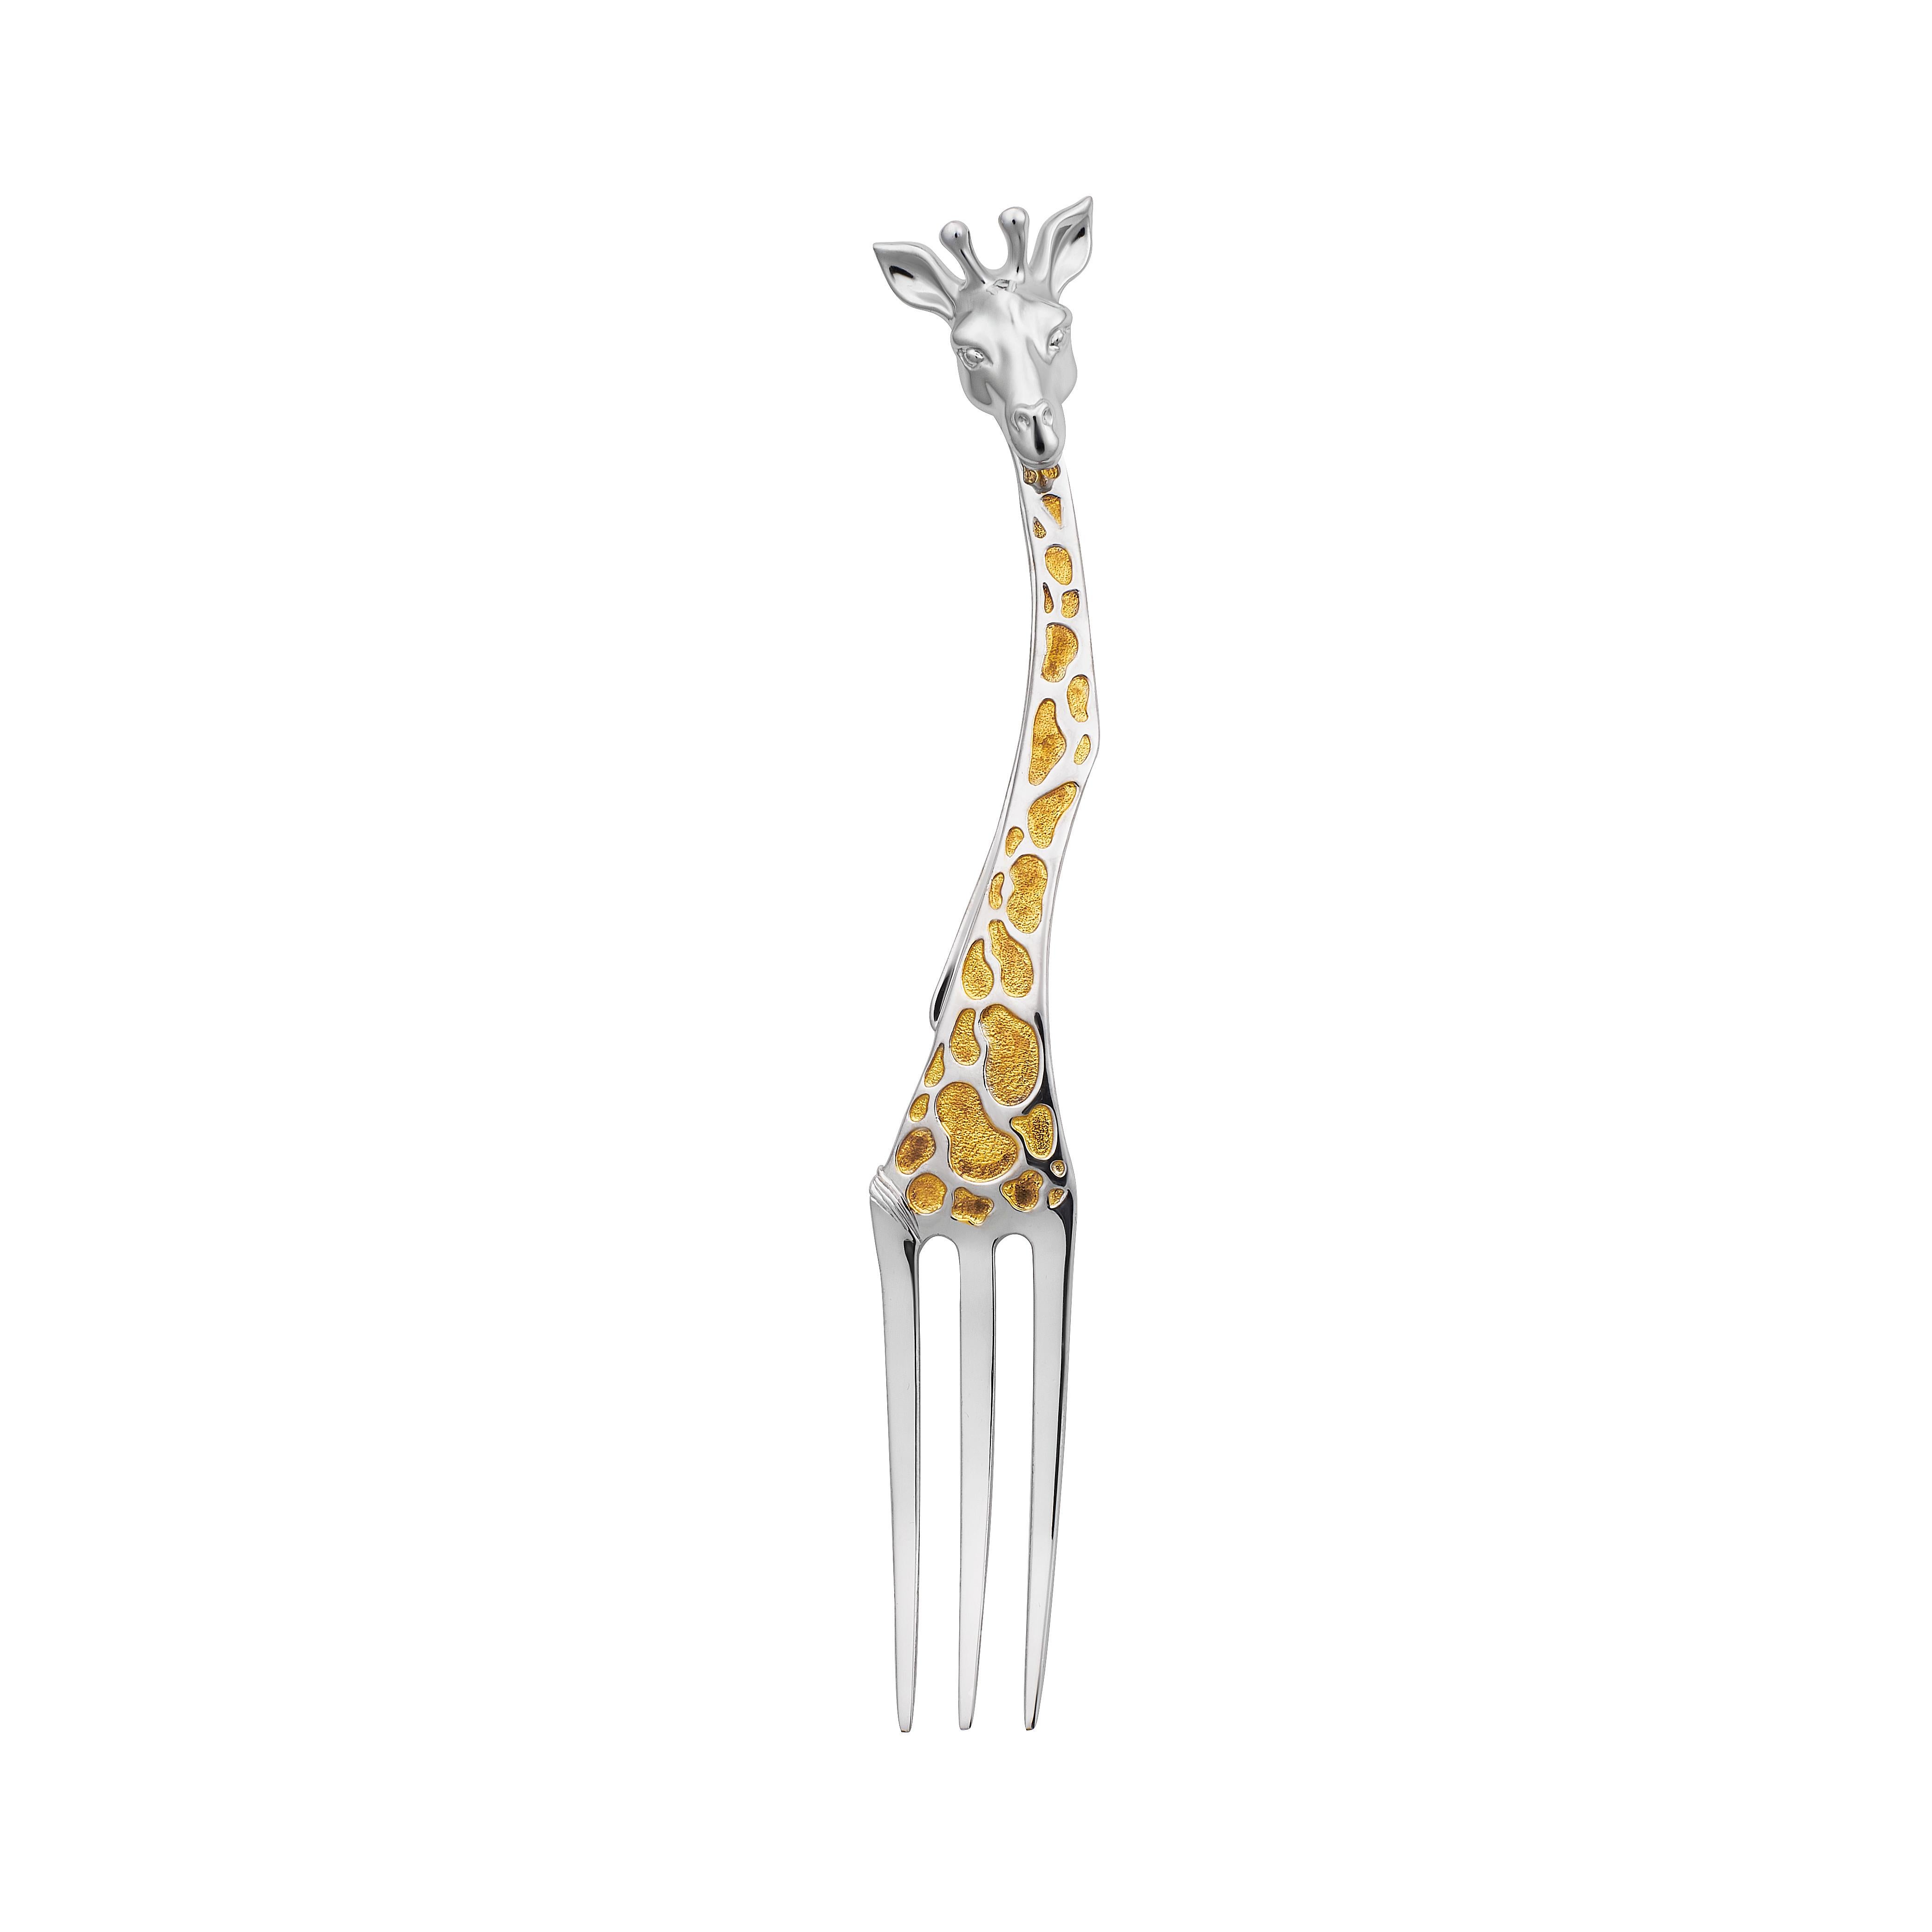 Contemporary Moiseikin Silver Gold Plated Giraffe Cutlery Gift for Baby and Children